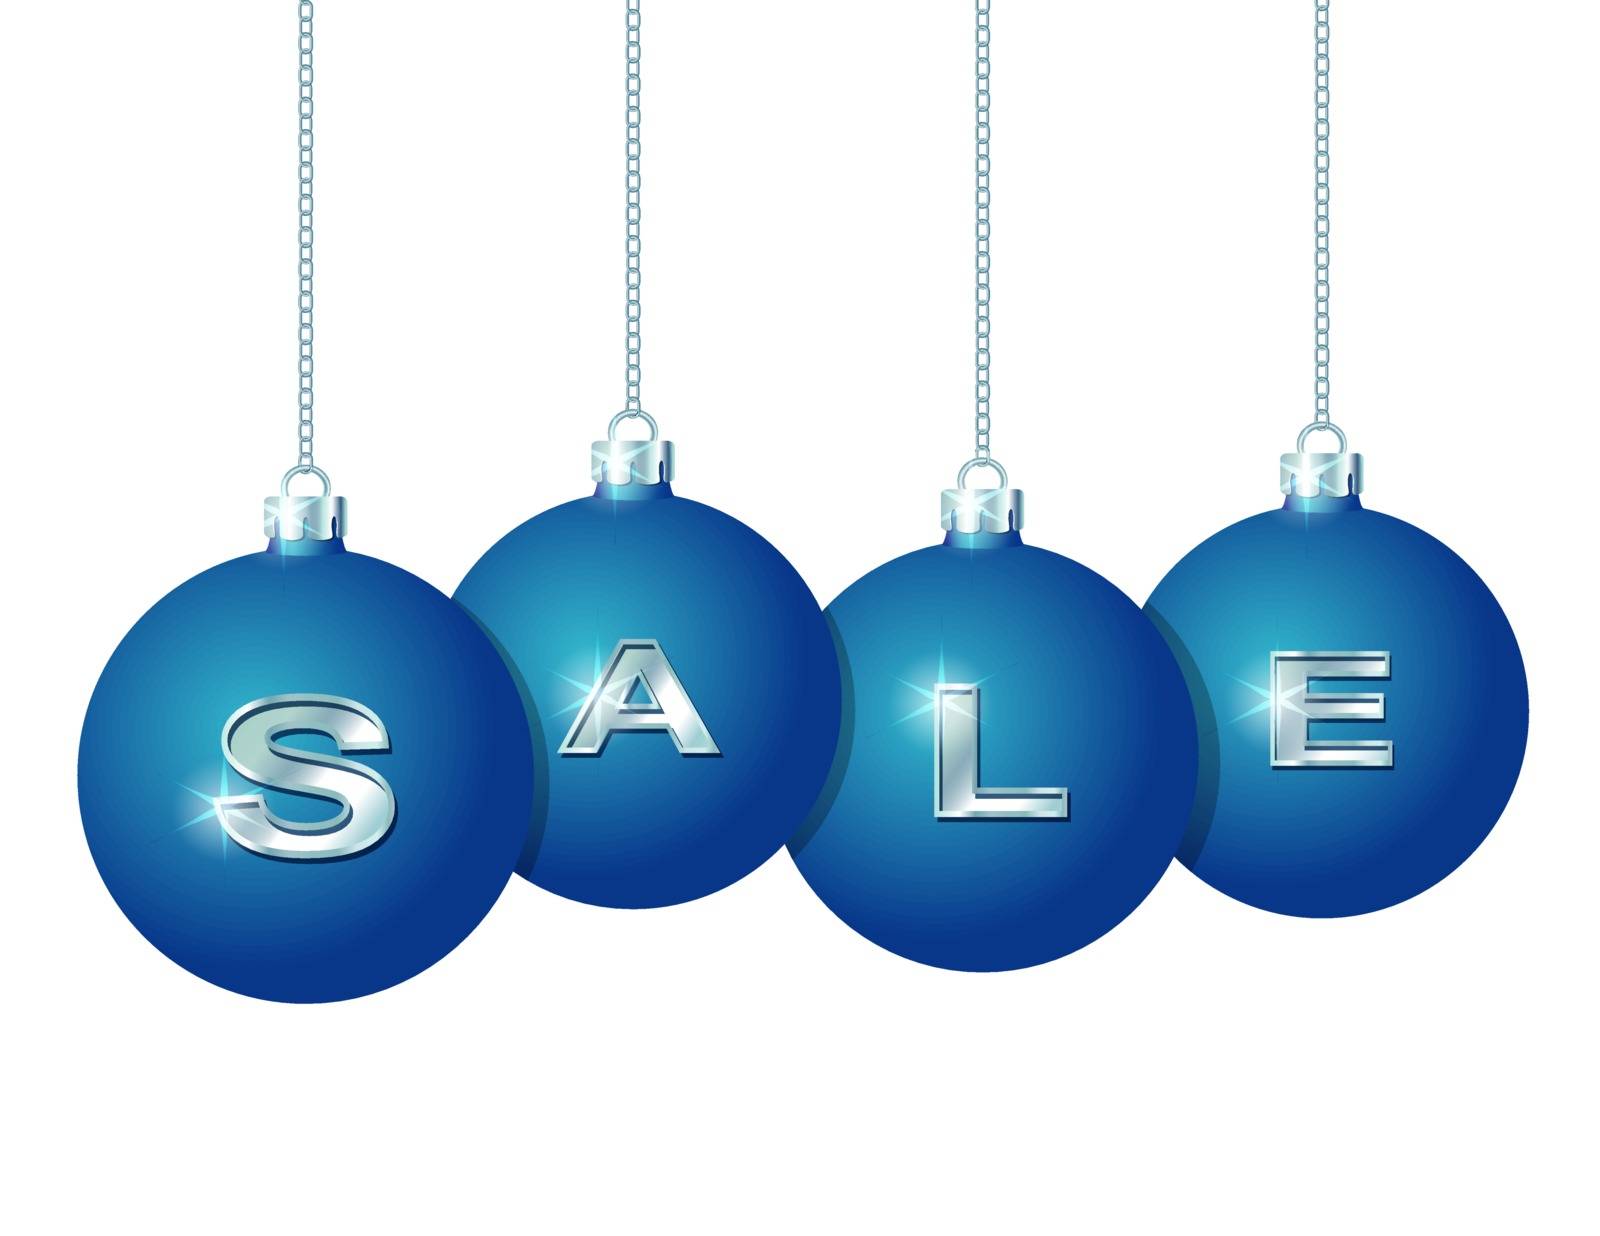 Blue Christmas balls Hanging on silver chains with silver word Sale written on them.